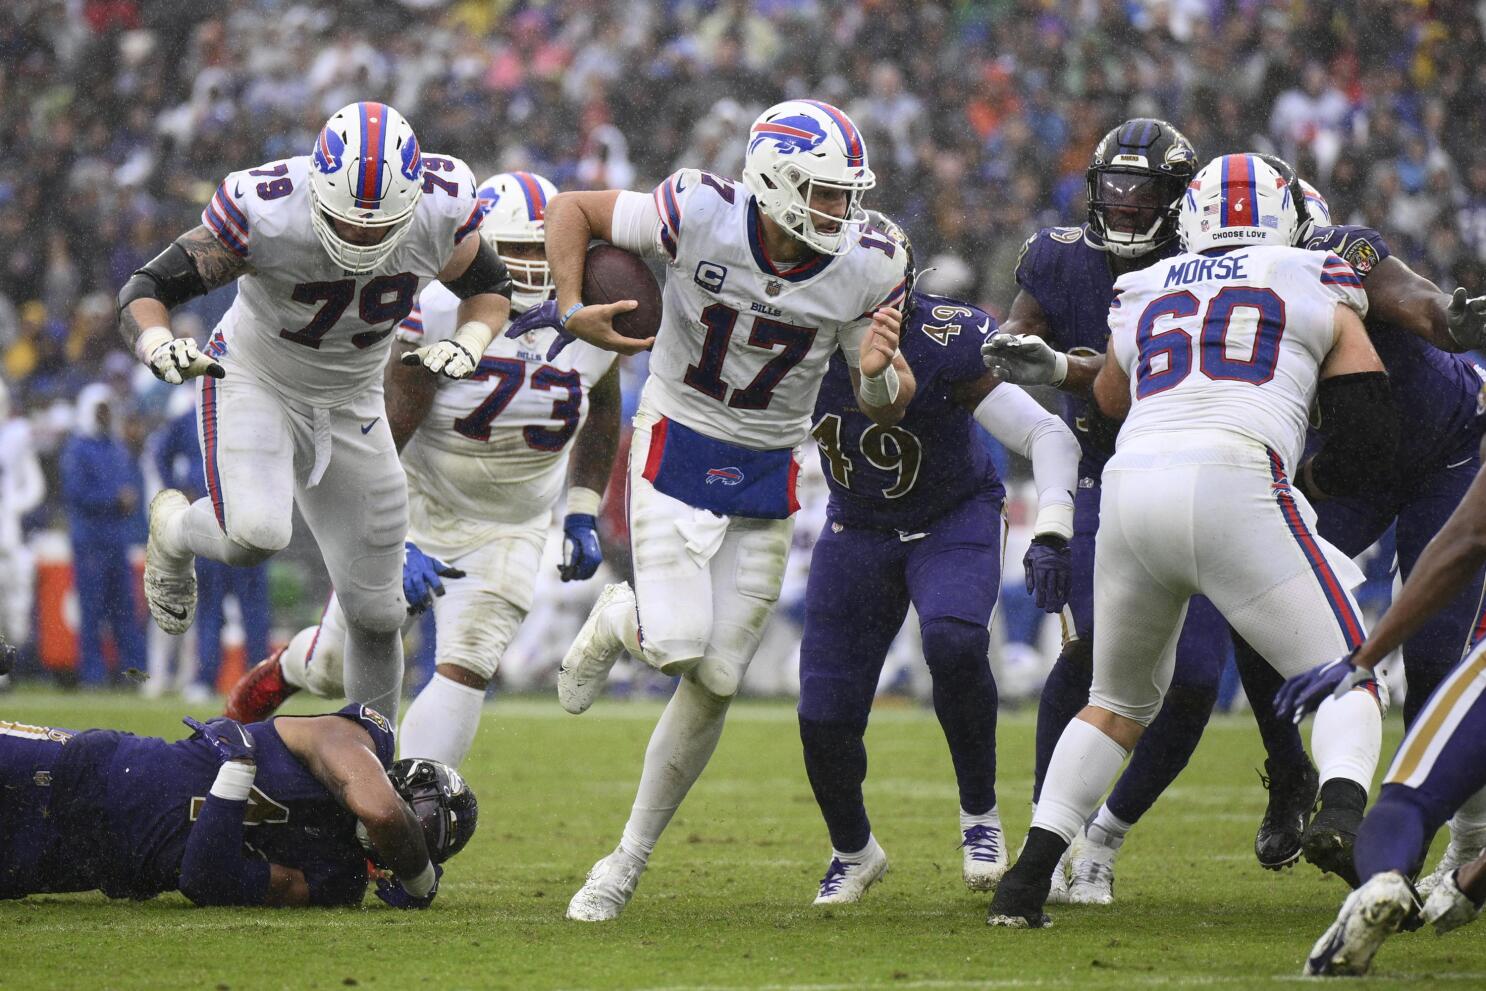 Allen rallies Bills to win after Ravens' 4th-down try fails